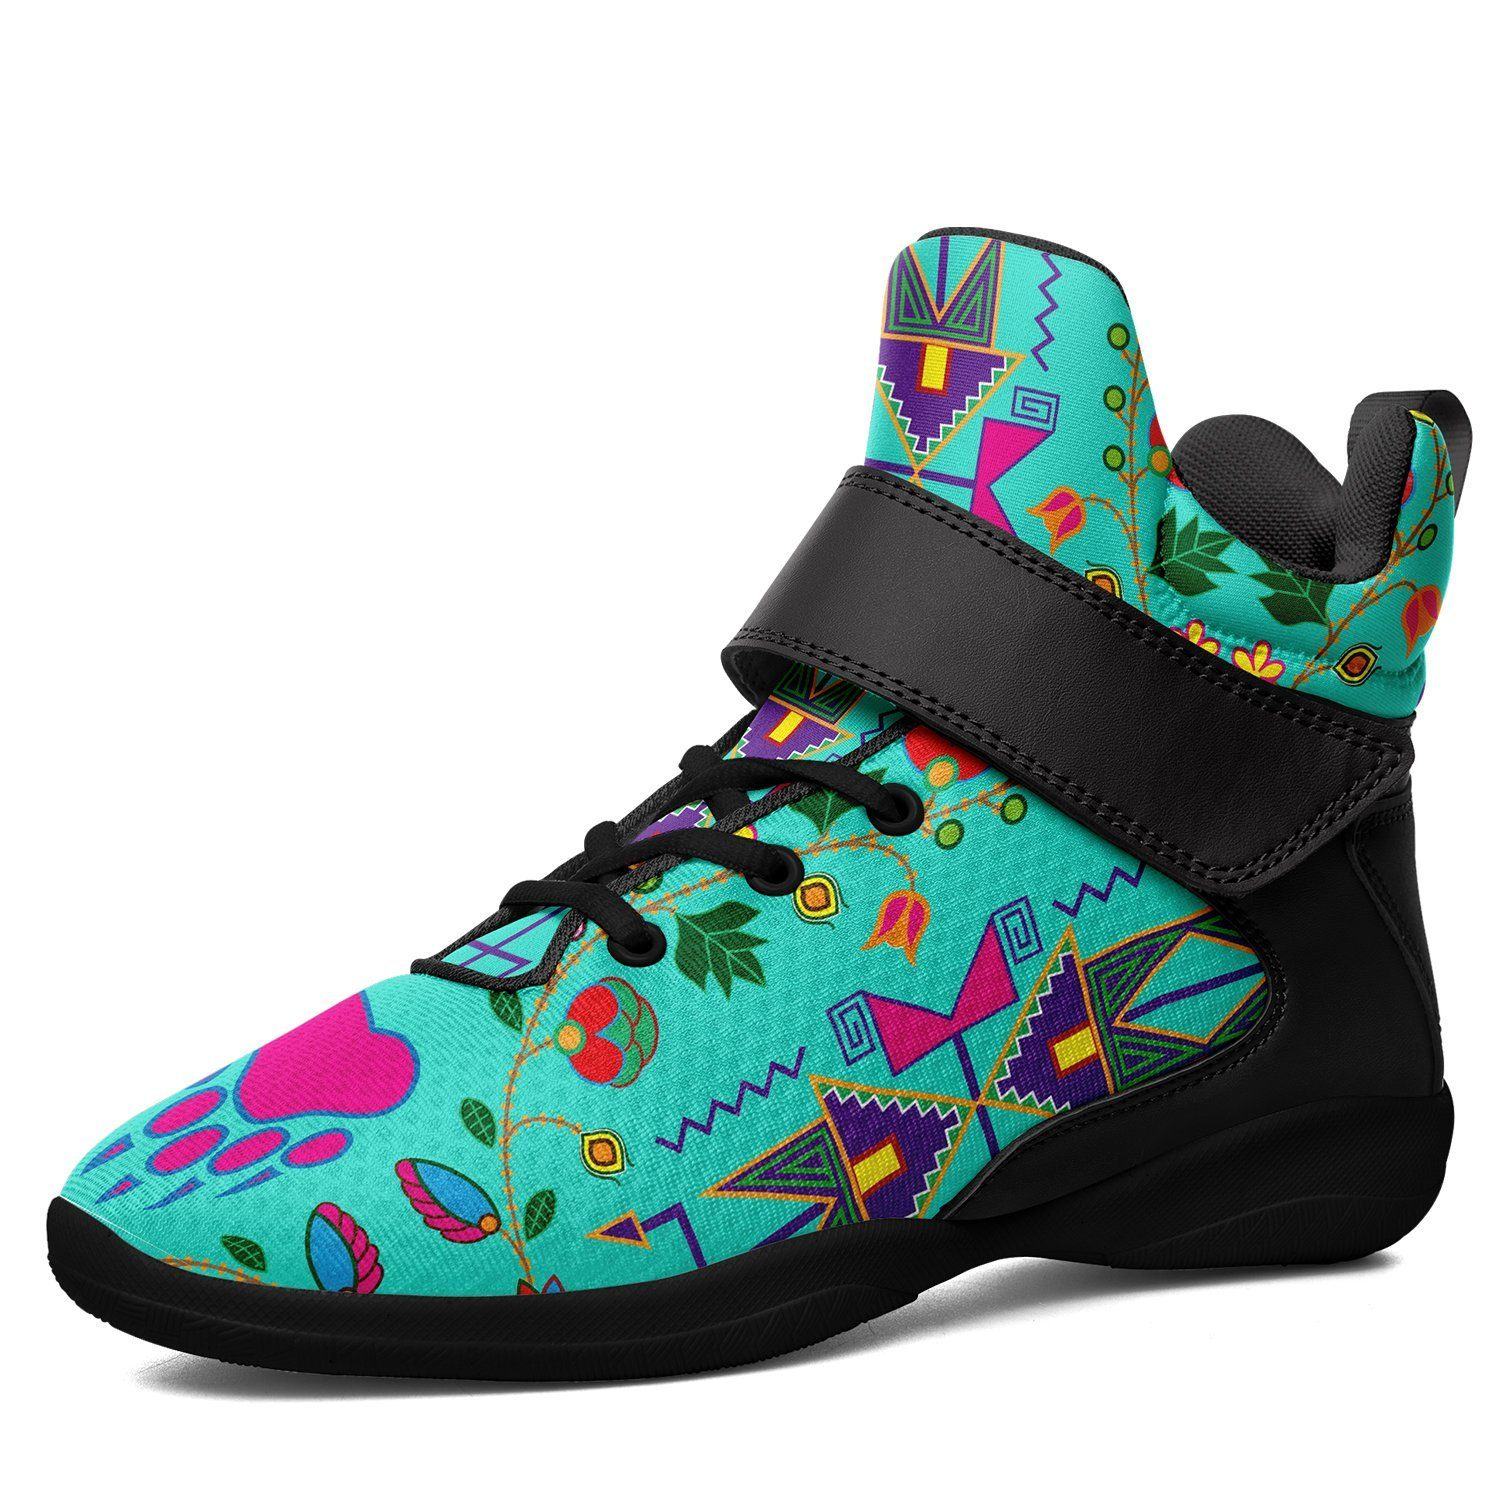 Geometric Floral Fall Sky Kid's Ipottaa Basketball / Sport High Top Shoes 49 Dzine US Women 4.5 / US Youth 3.5 / EUR 35 Black Sole with Black Strap 